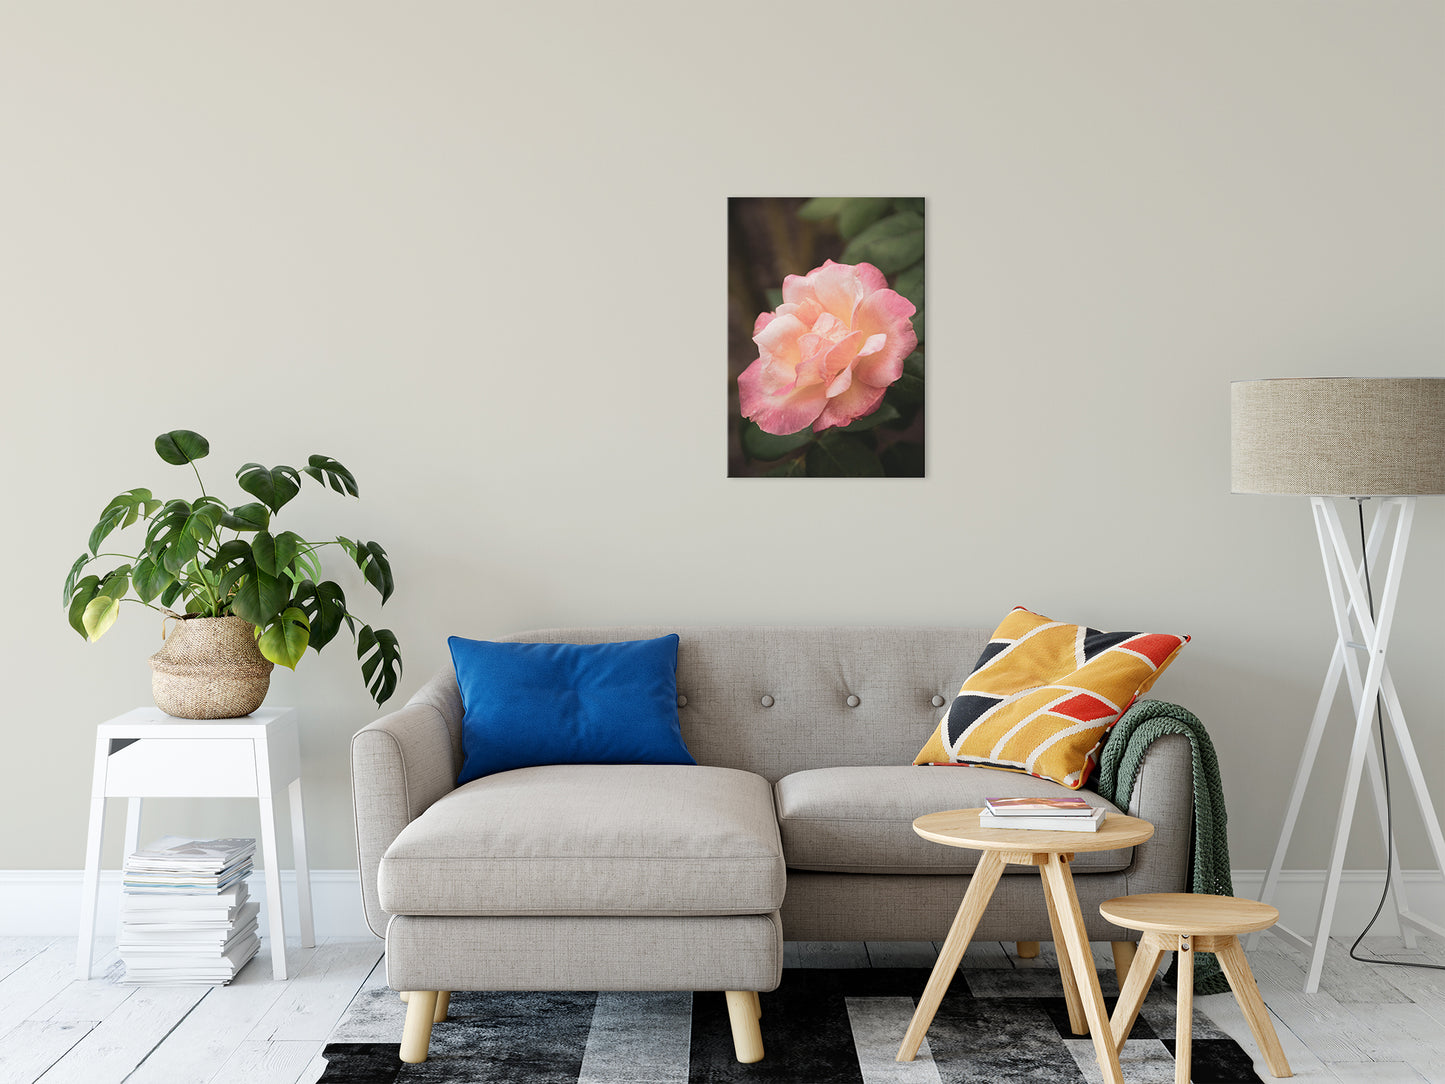 Pink and White Softened Rose Floral Nature Photo Fine Art Canvas Wall Art Prints 20" x 24" - PIPAFINEART